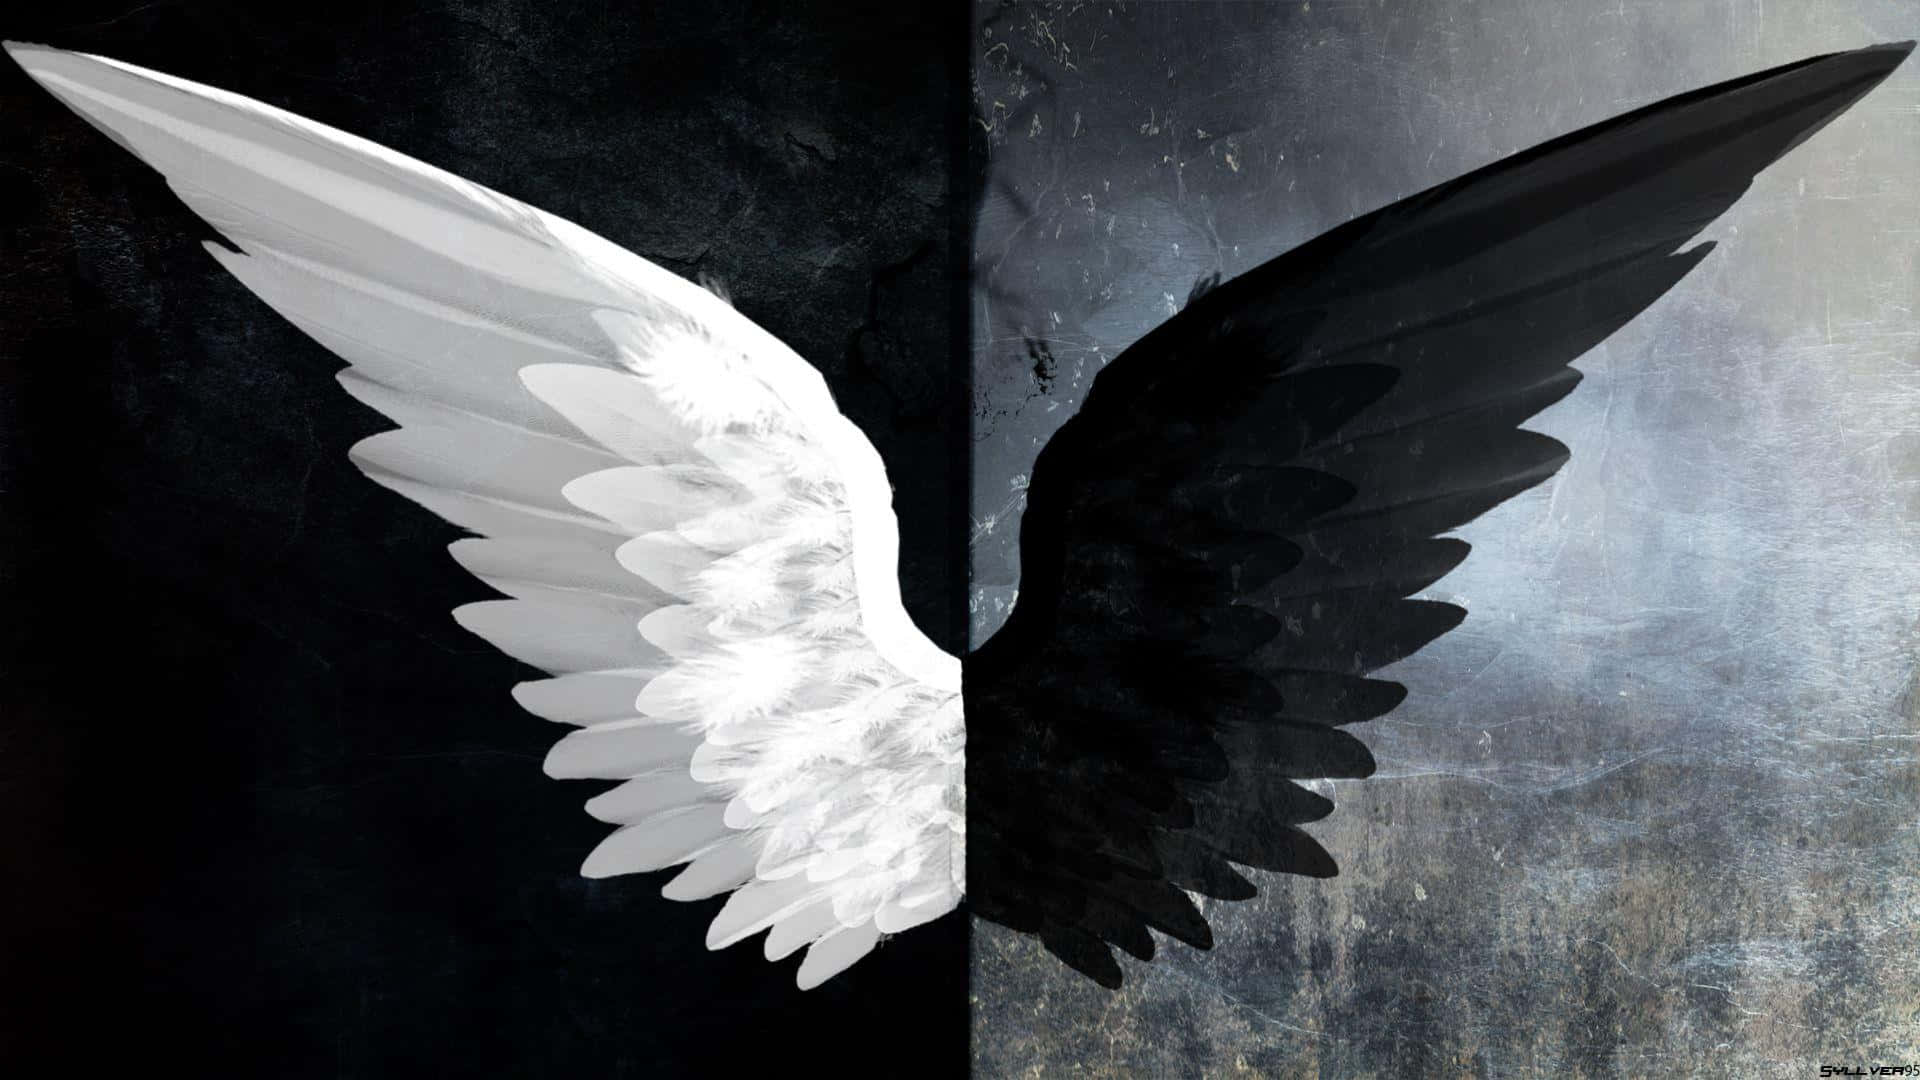 Black Angel wings representing life and spirituality.